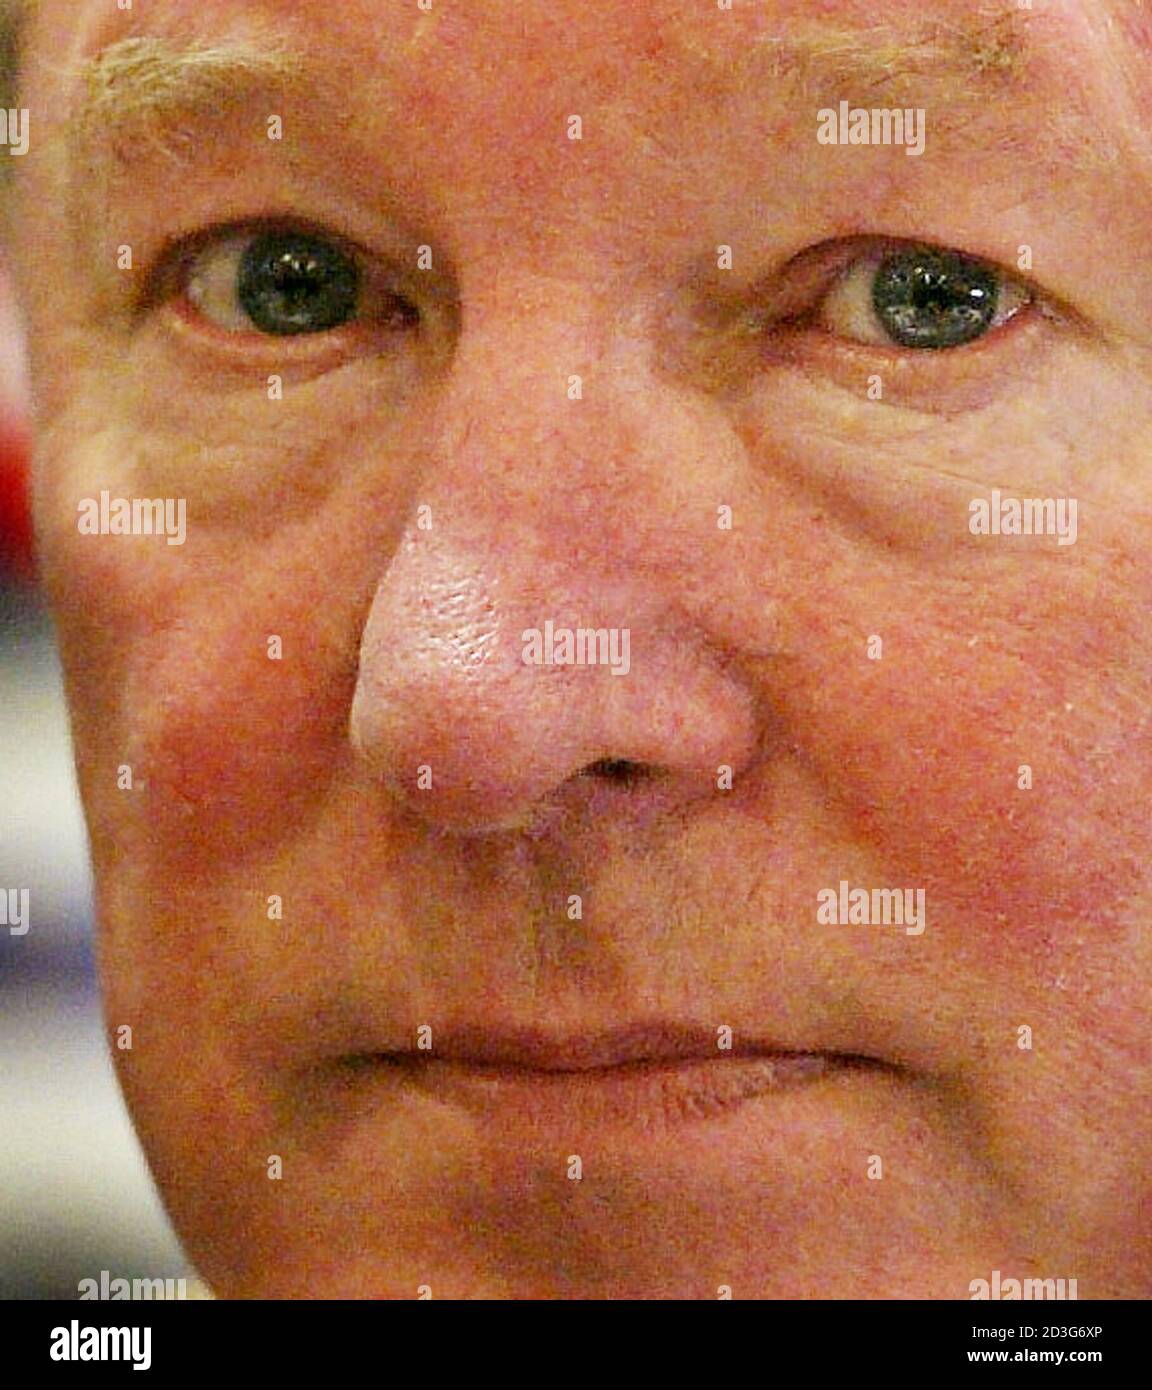 Manchester United manager Sir Alex Ferguson talks to the media at a news  conference at Old Trafford, Manchester, February 18, 2003. Ferguson  admitted on February 17 injuring Manchester United midfielder and England